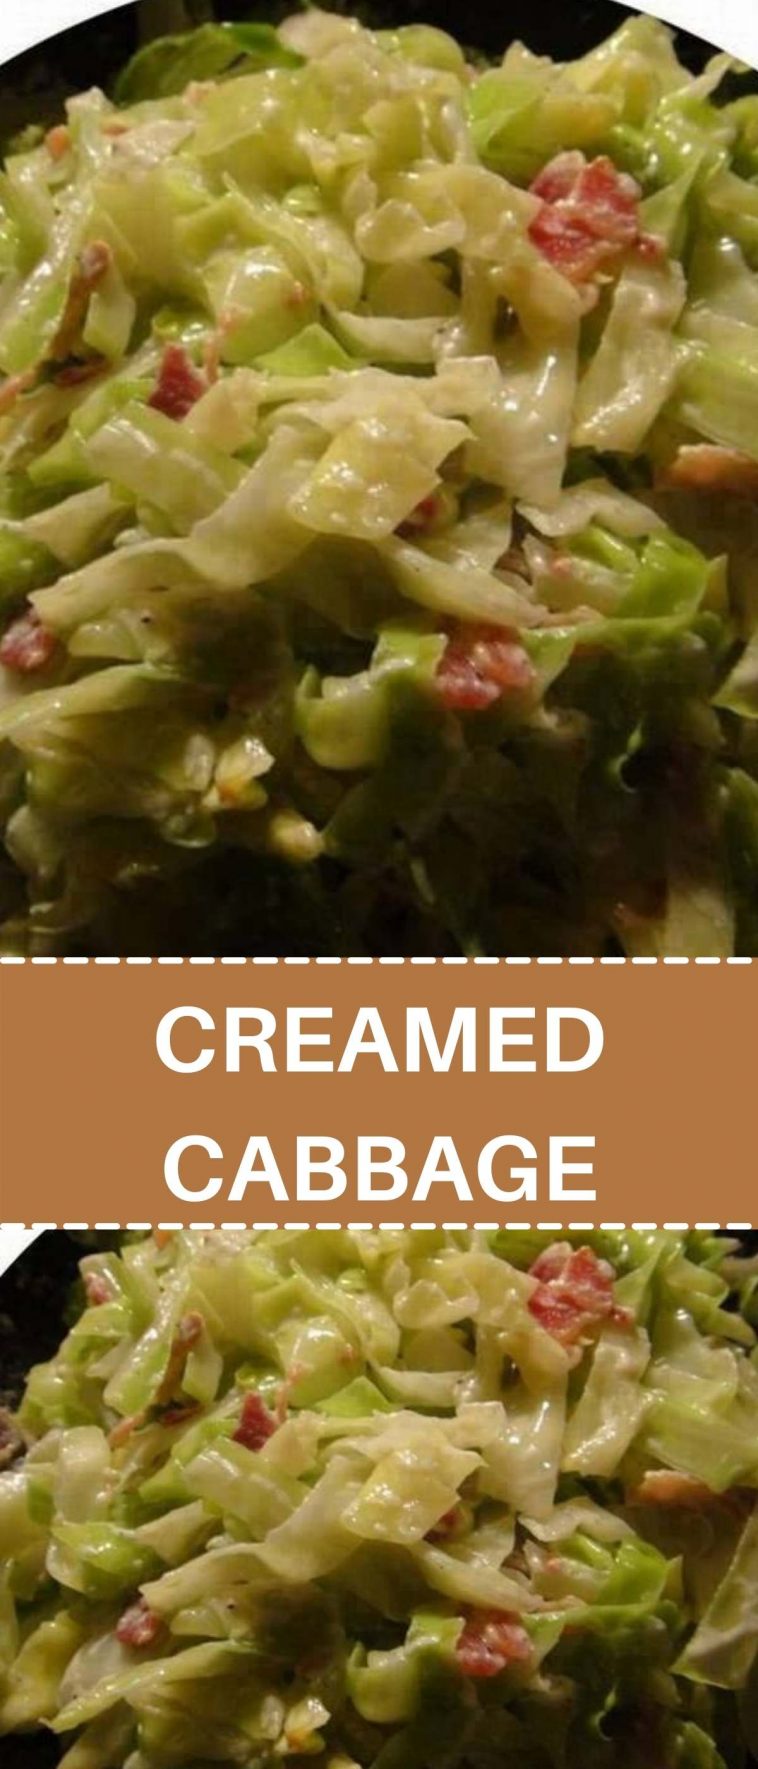 CREAMED CABBAGE